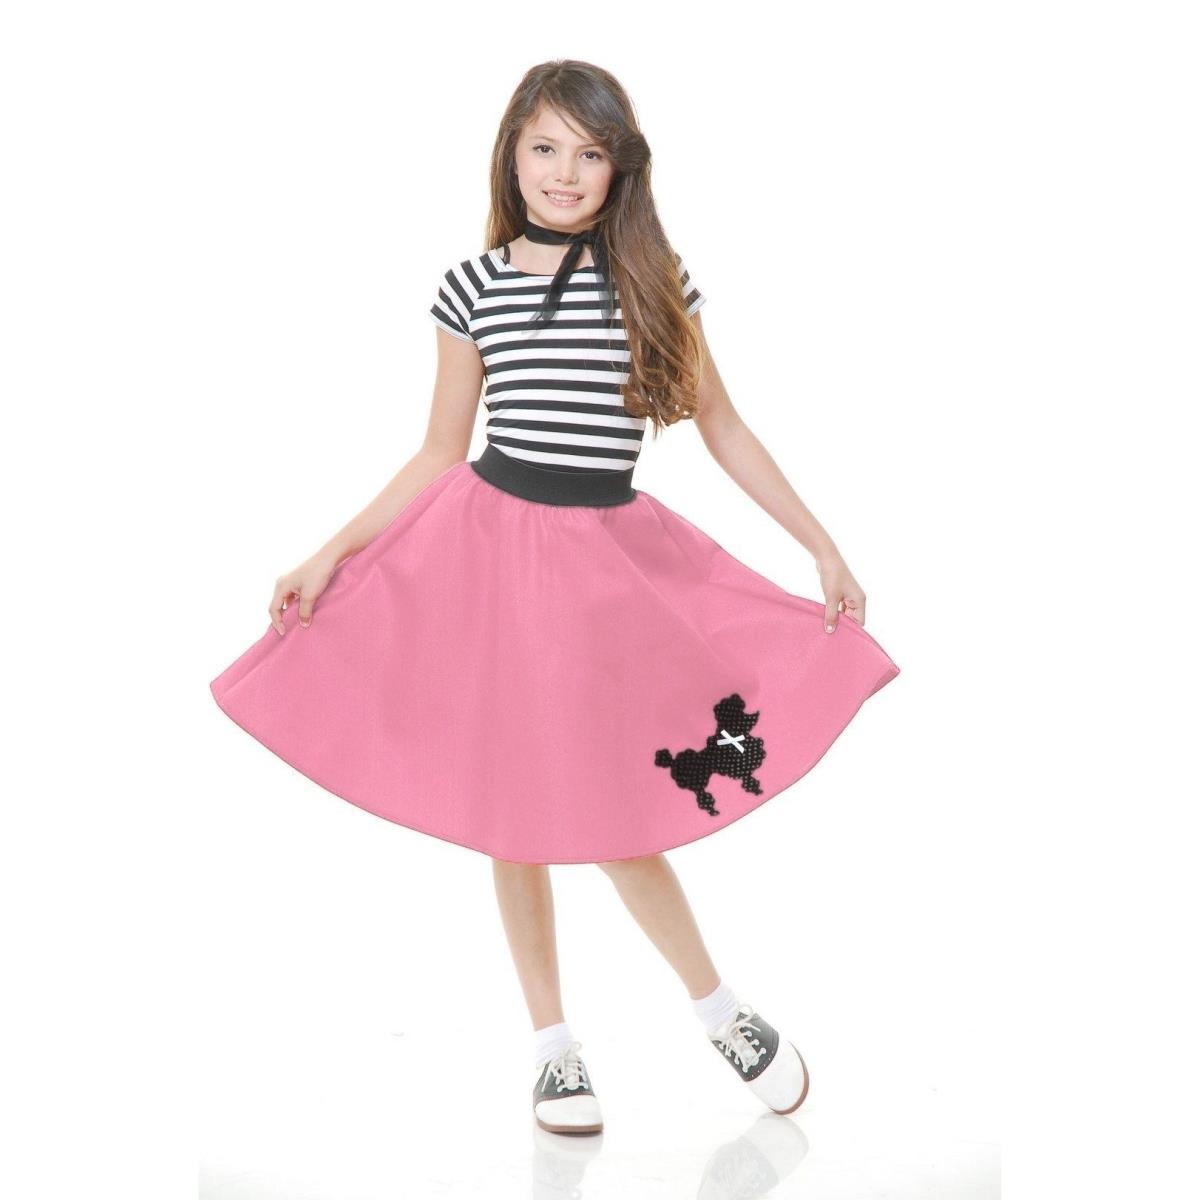 282130 Poodle Skirt Child Costume, Pink - Small